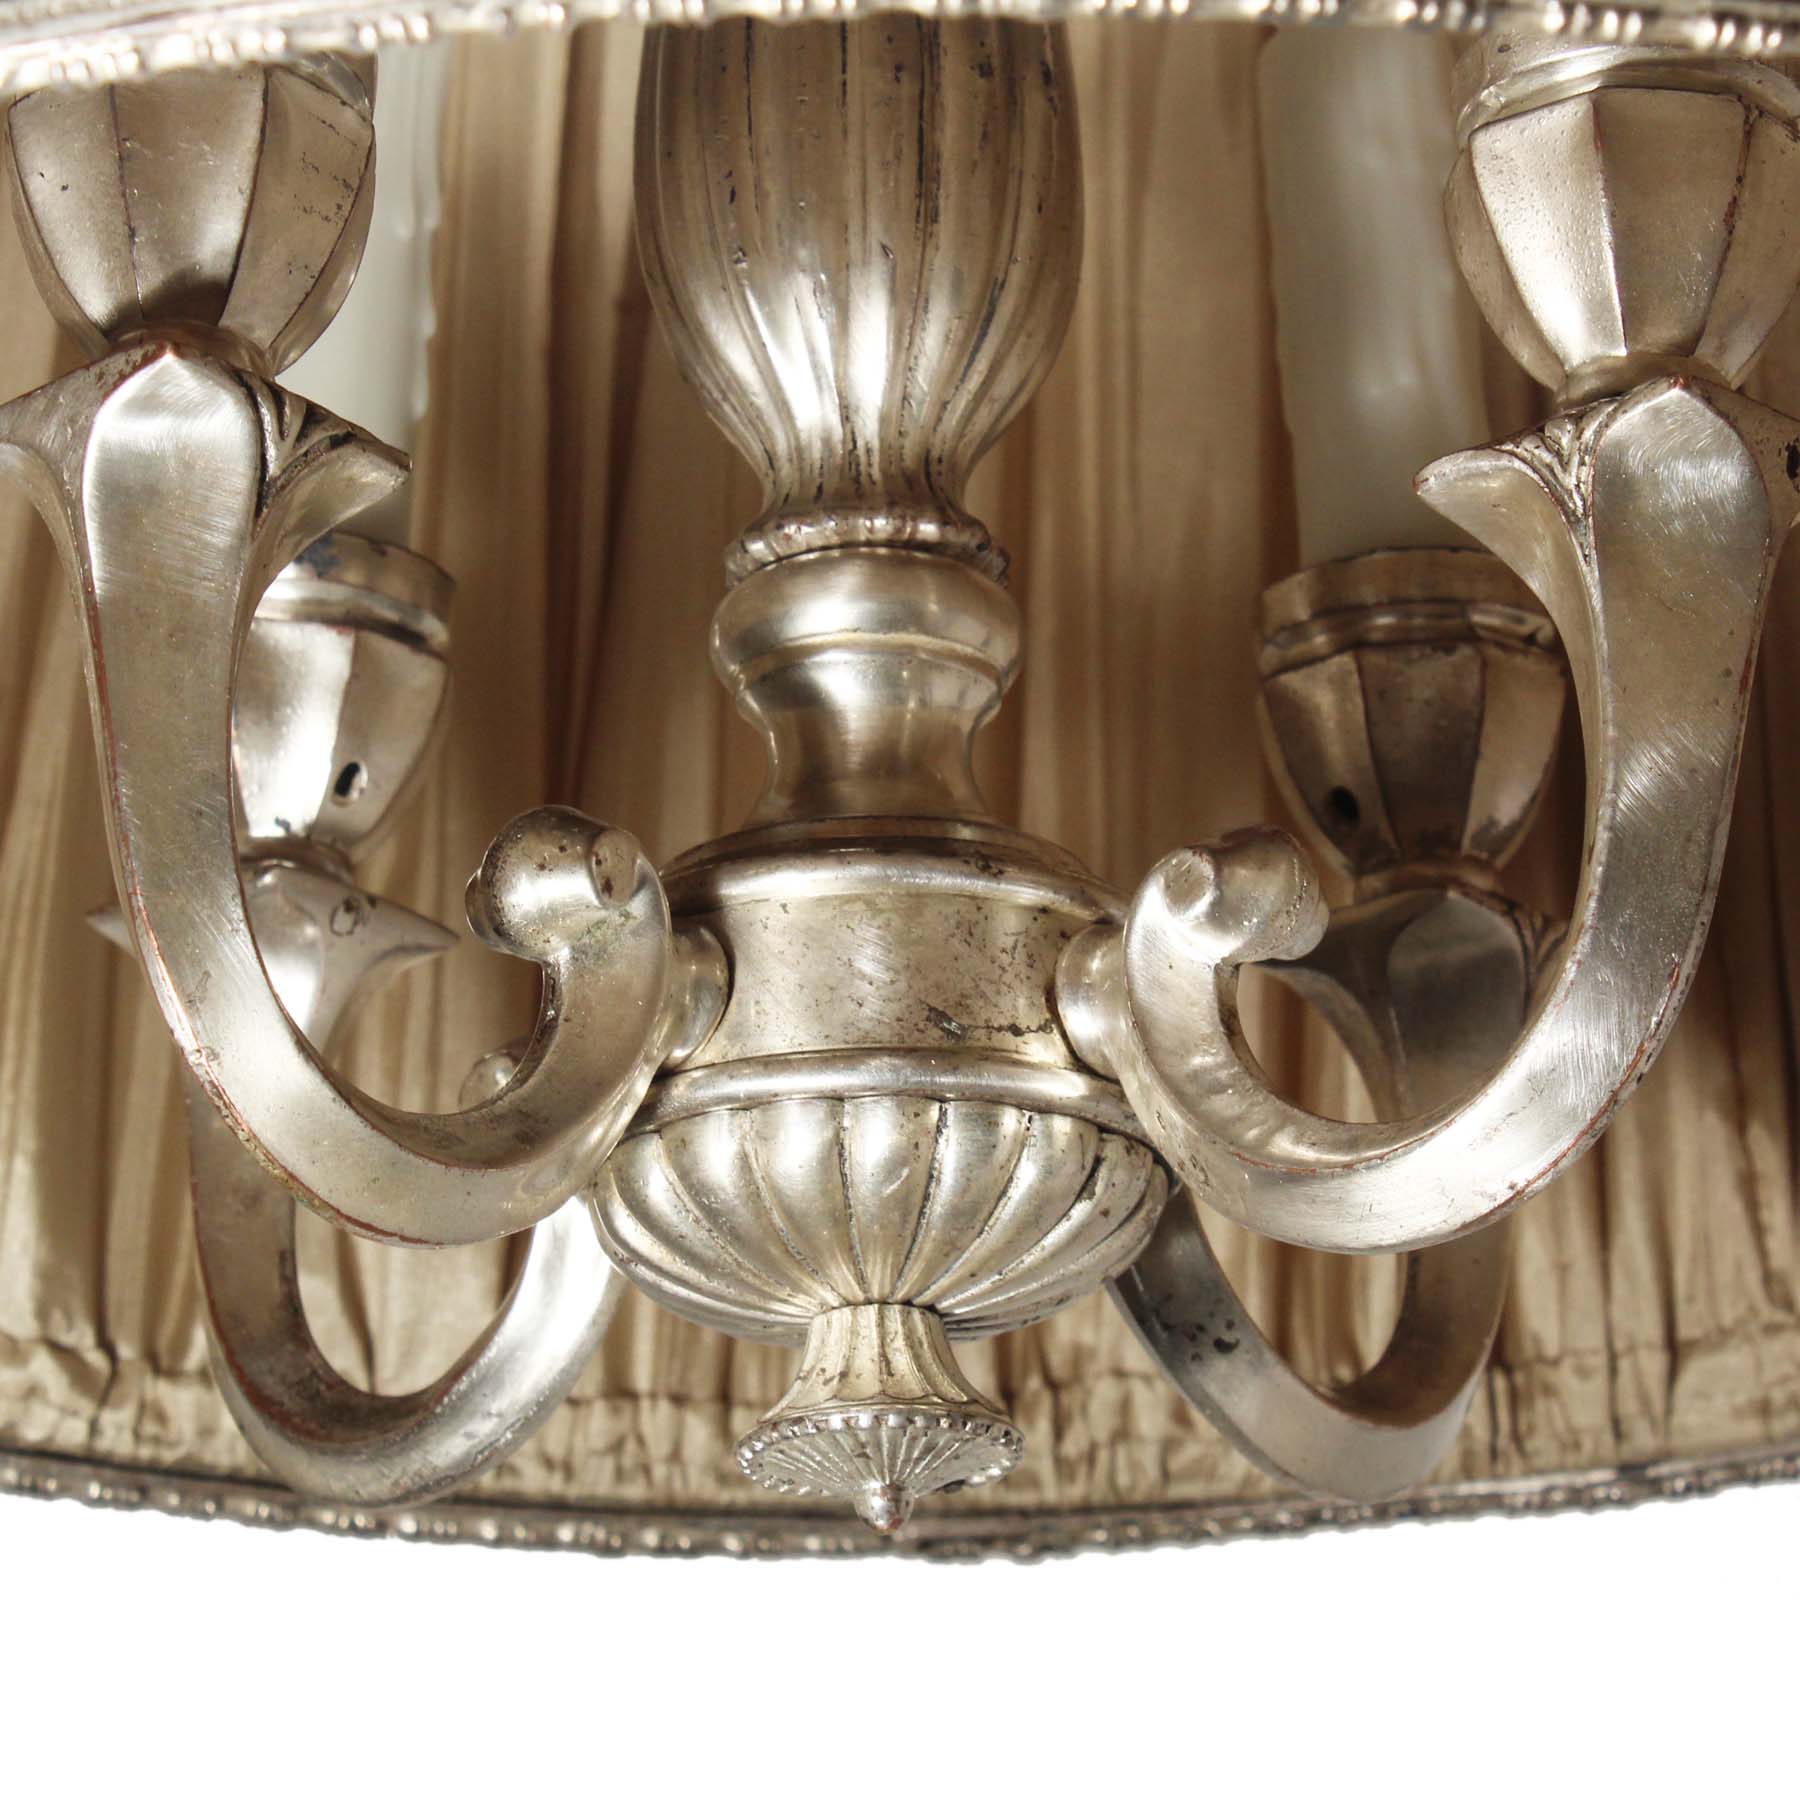 SOLD Antique Neoclassical Pendant Light, Silver Plate-67867